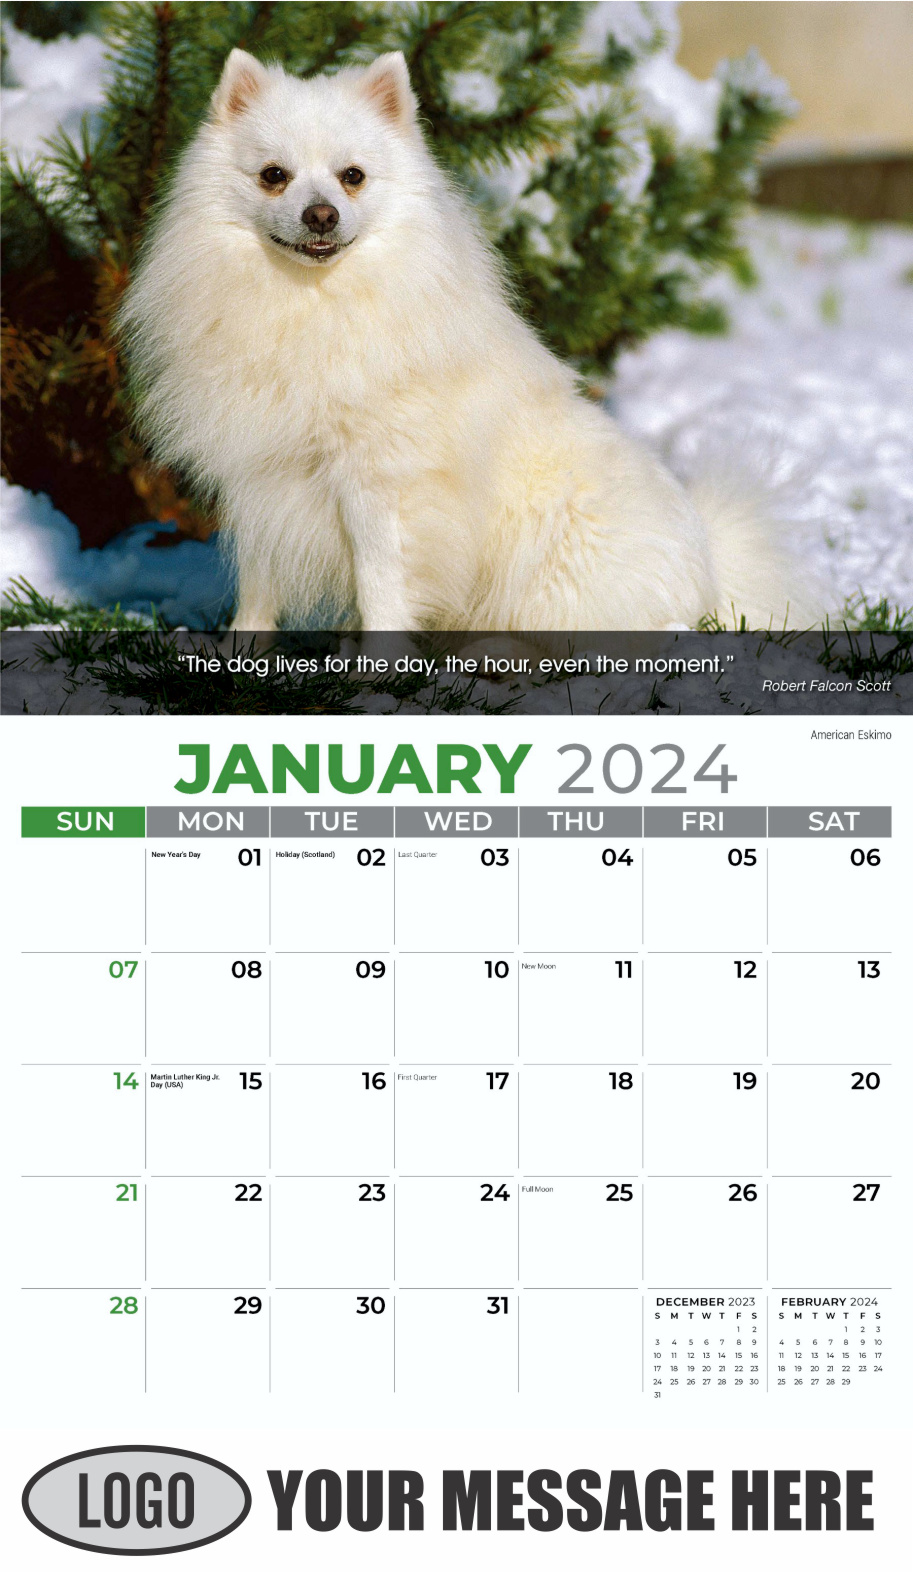 Dogs 2024 Vets and Pets Business Promotion Calendar - January